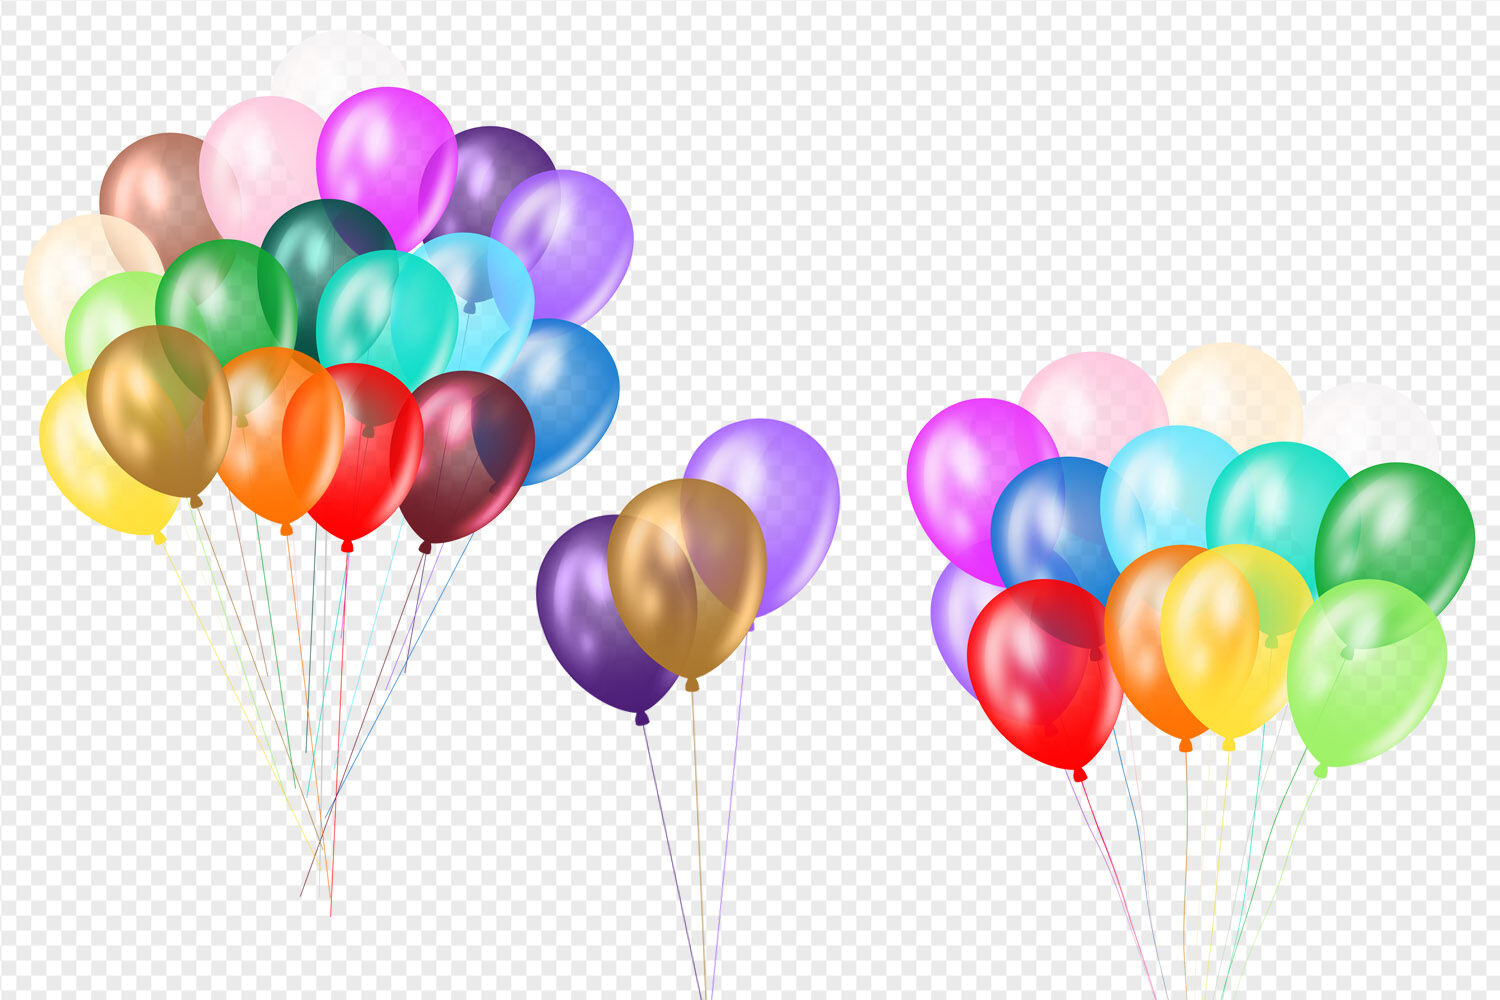 Pastel Rainbow Balloons Clipart Graphic by Digital Curio